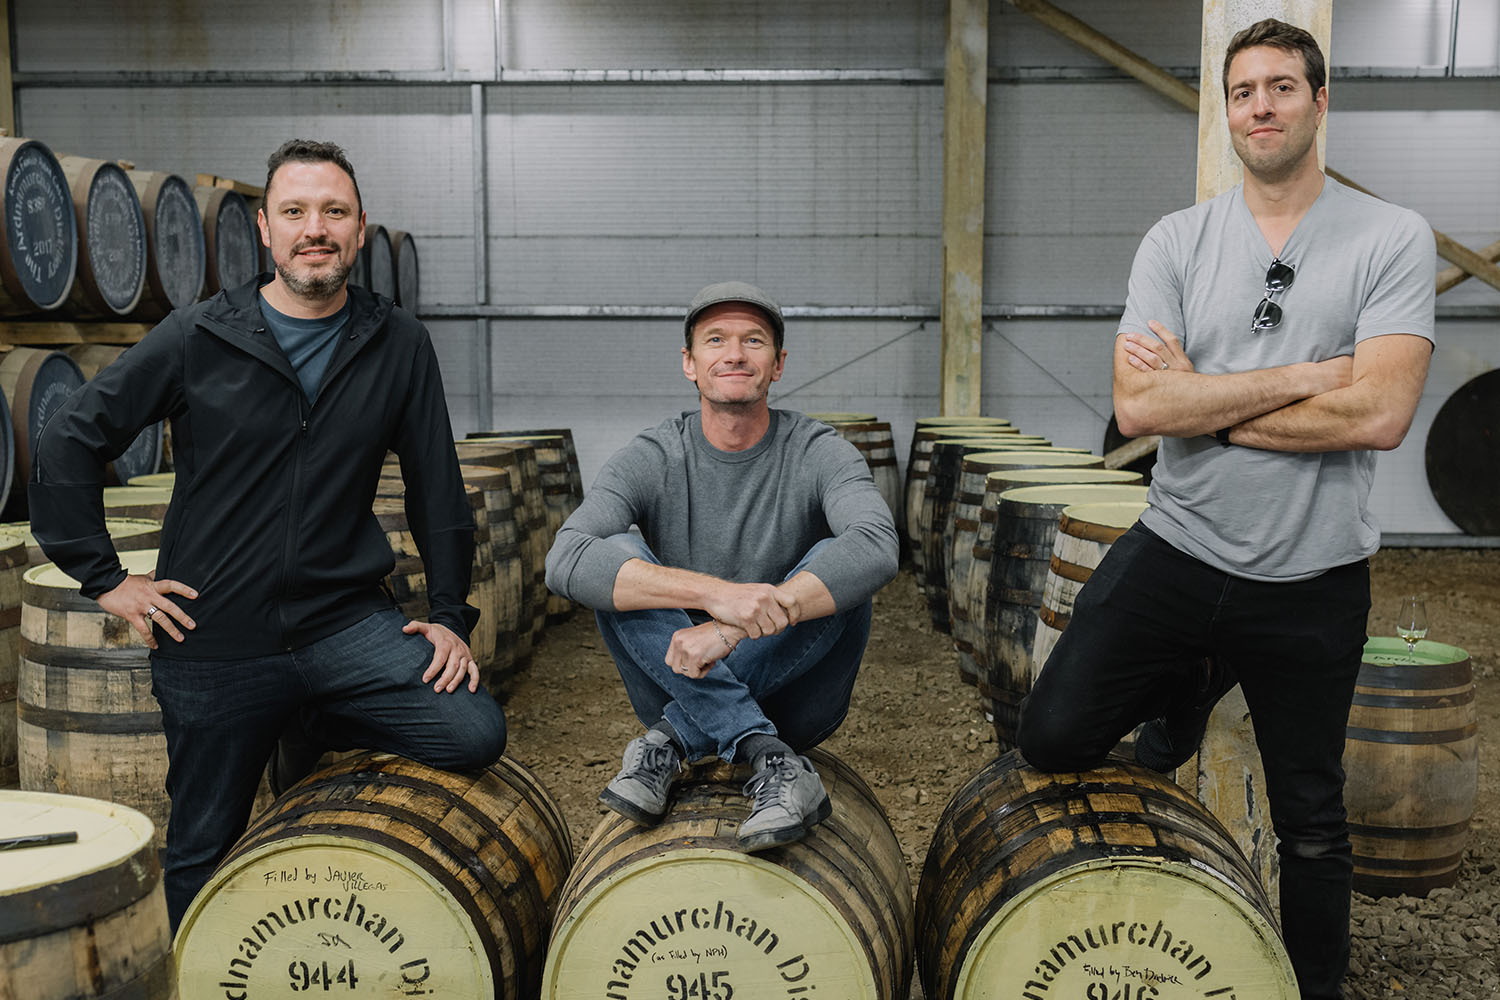 NPH sitting on barrels with two other men